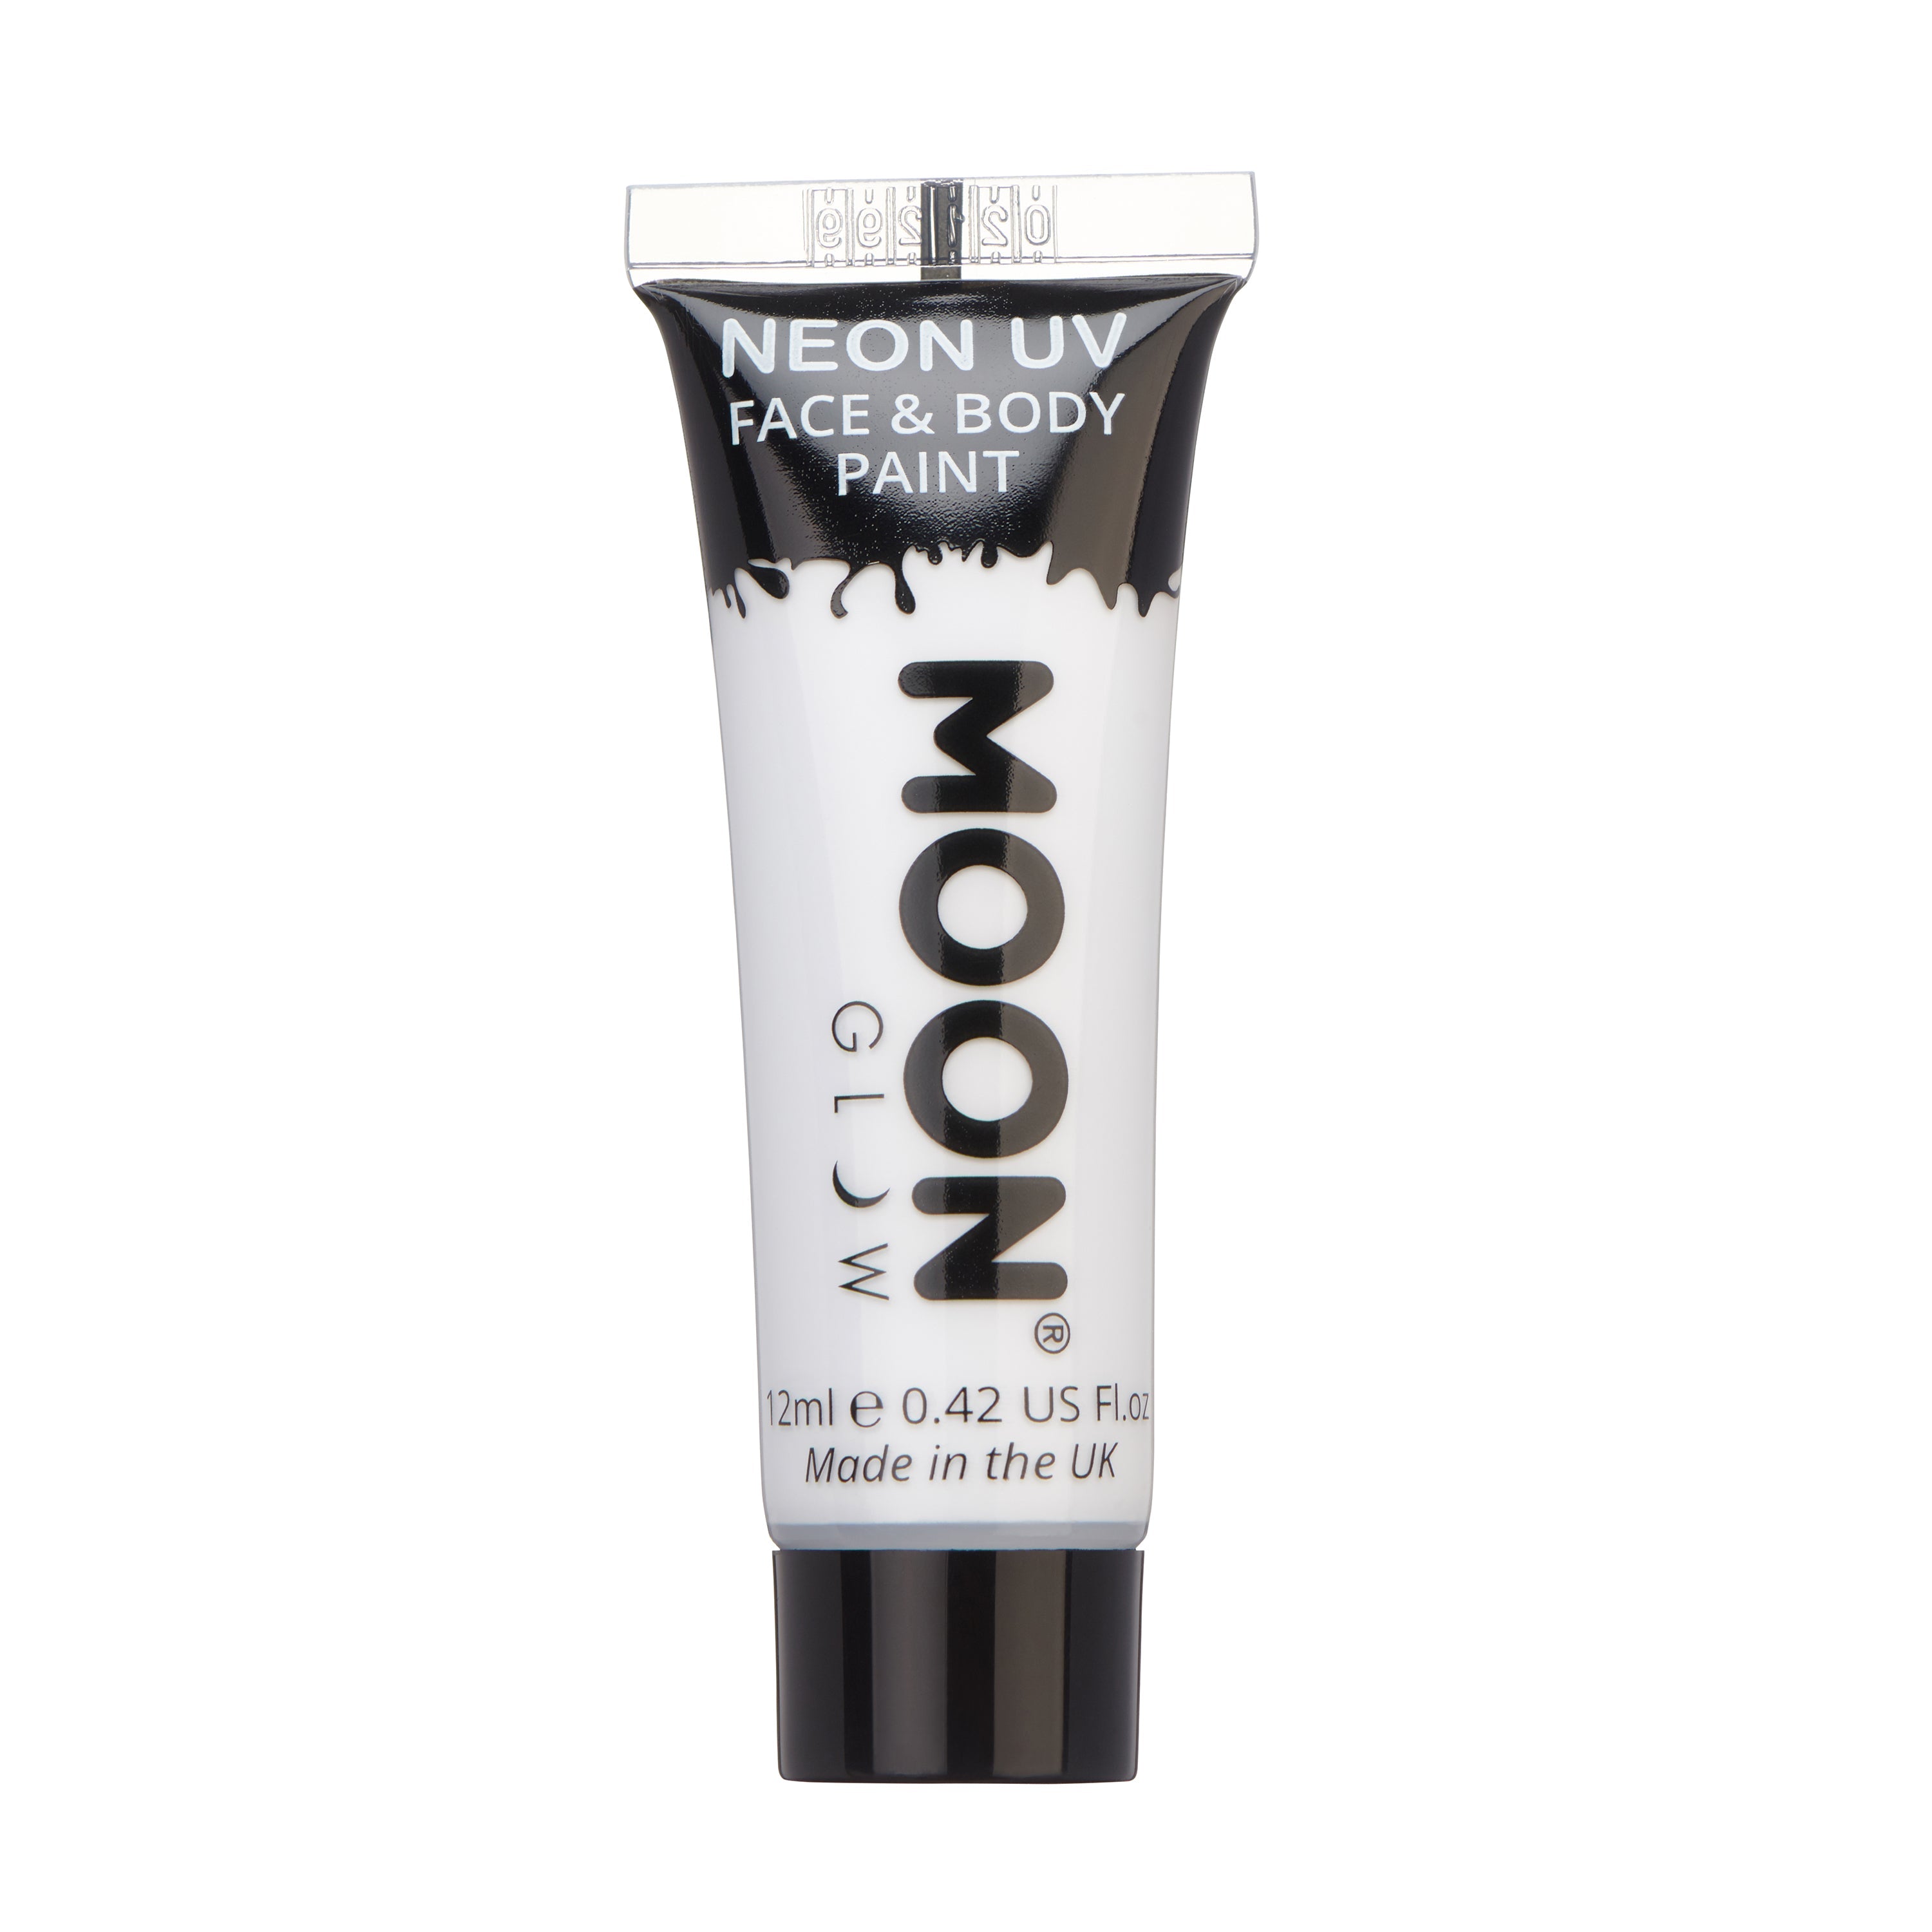 White - Neon UV Glow Blacklight Face & Body Paint Makeup, 12mL. Cosmetically certified, FDA & Health Canada compliant, cruelty free and vegan.